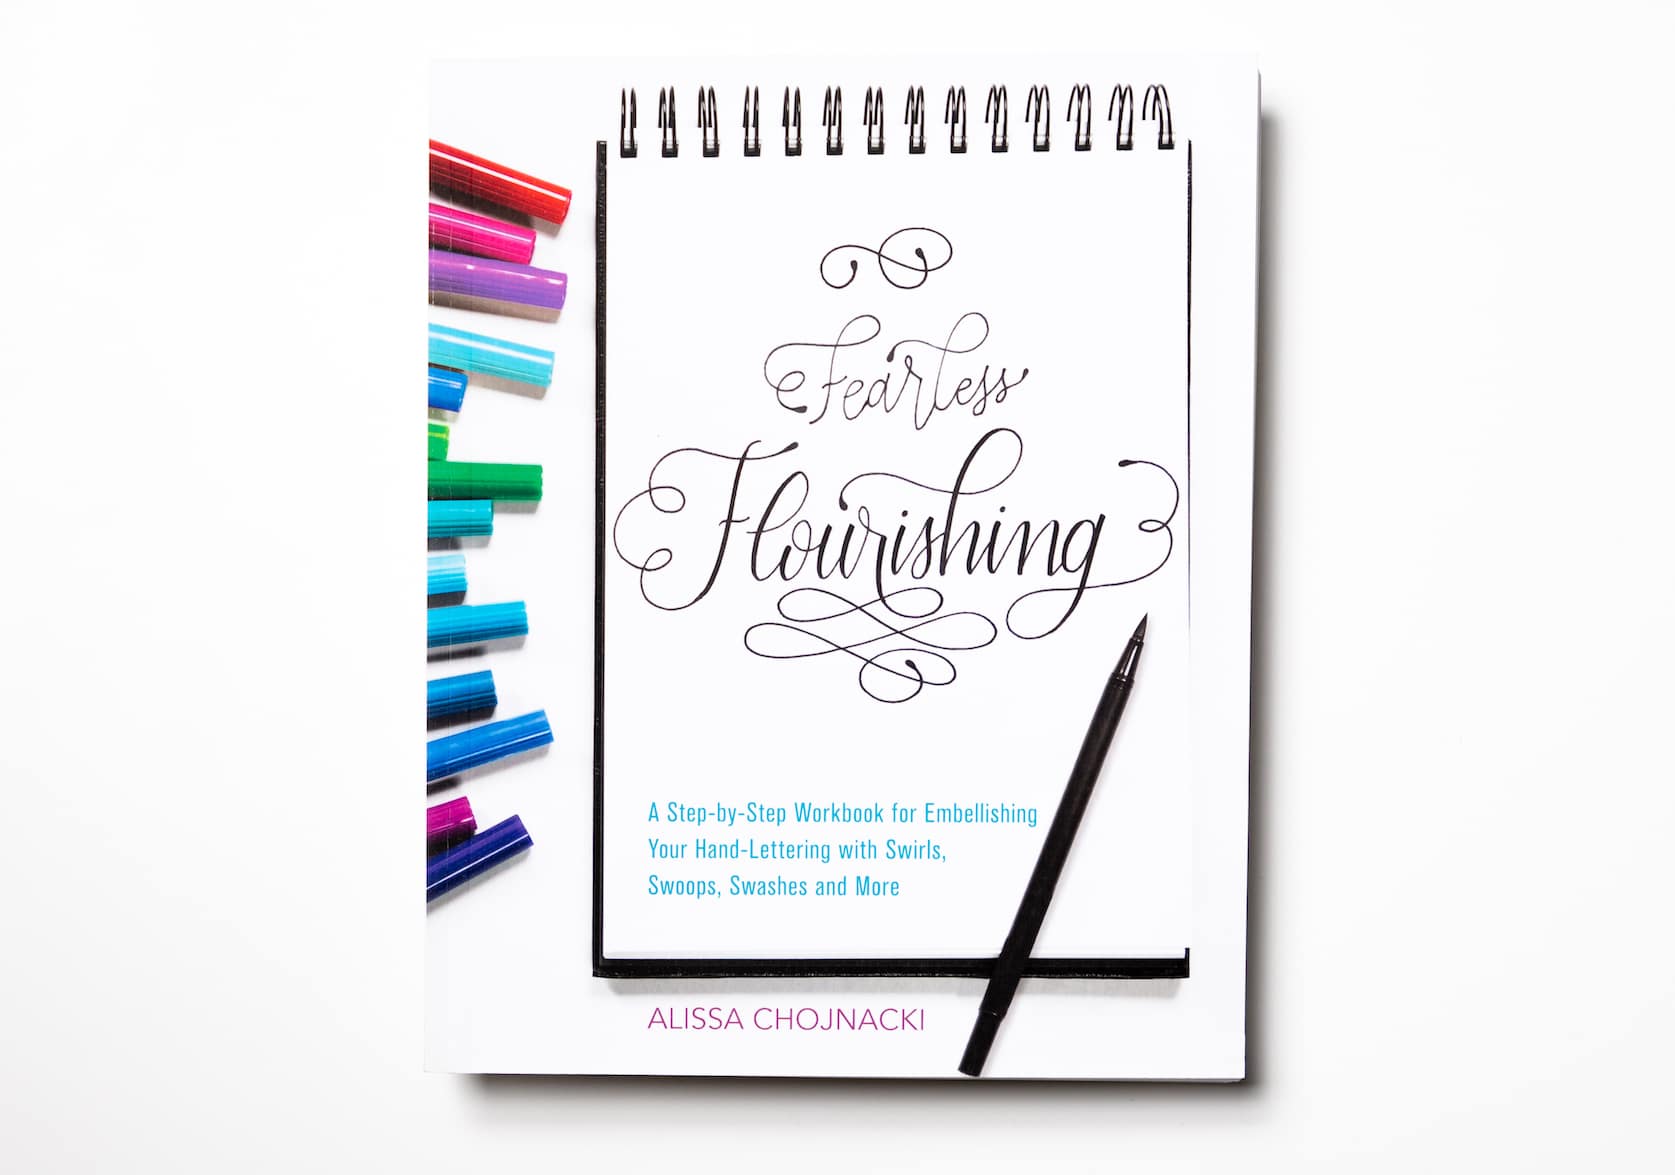 Fearless Flourishing: A Step-by-Step Workbook for Embellishing Your Hand-Lettering with Swirls, Swoops, Swashes and More by Alissa Chojnacki